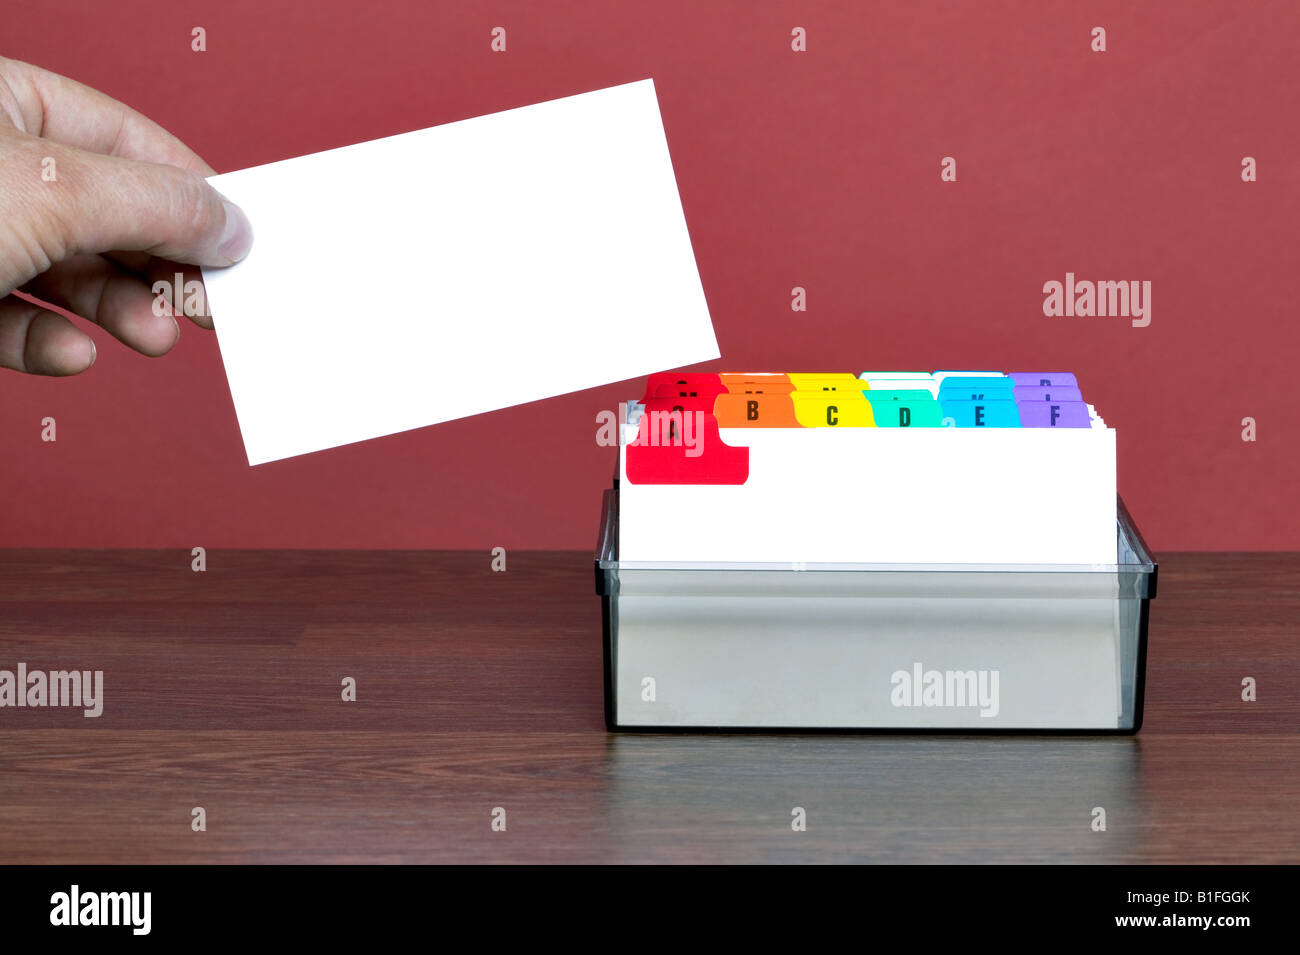 A blank card being pulled out from a file index insert your own contact details Stock Photo